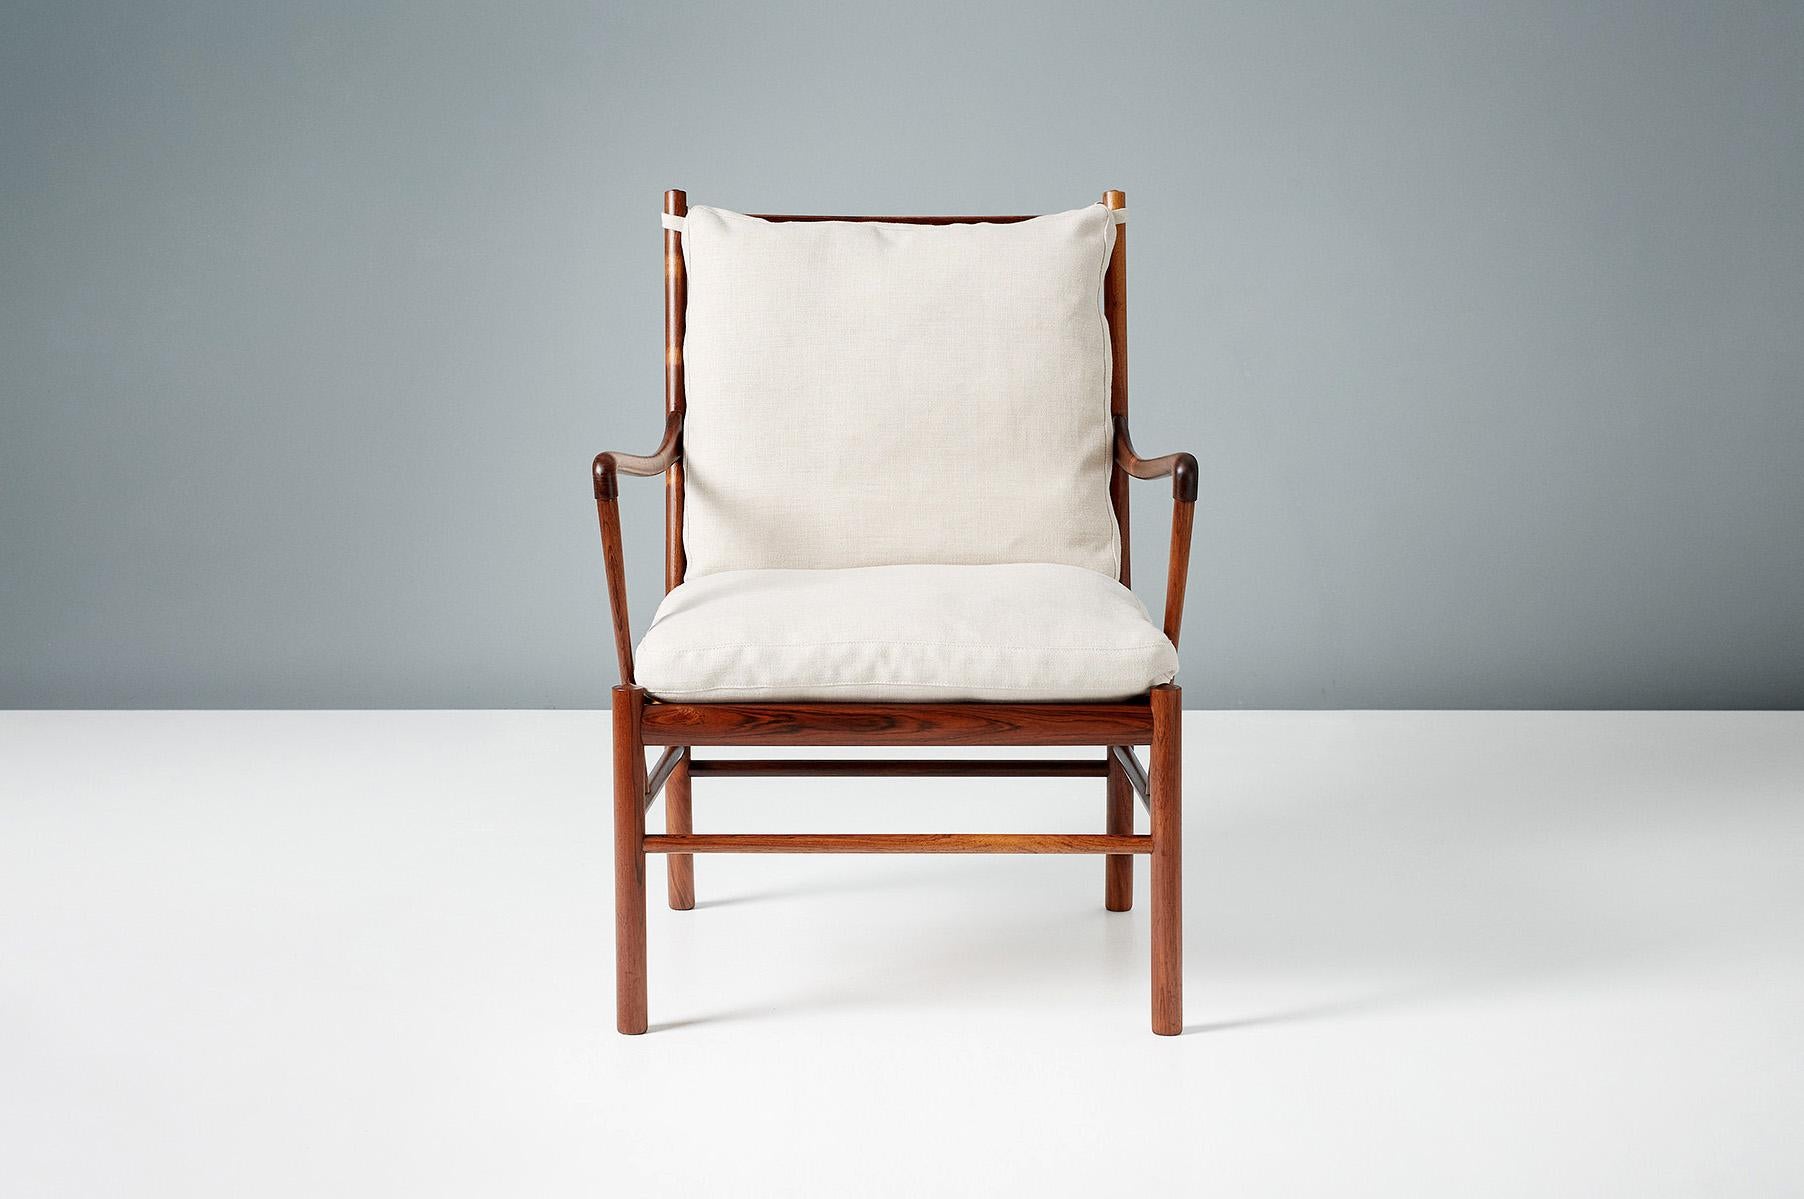 Ole Wanscher

PJ-149 Colonial chair, 1949

A fine pair of Ole Wanscher's most iconic design: The colonial chair. Produced by Poul Jeppesen in Denmark circa 1950s in exquisite Brazilian rosewood with original woven rattan cane seat and feather